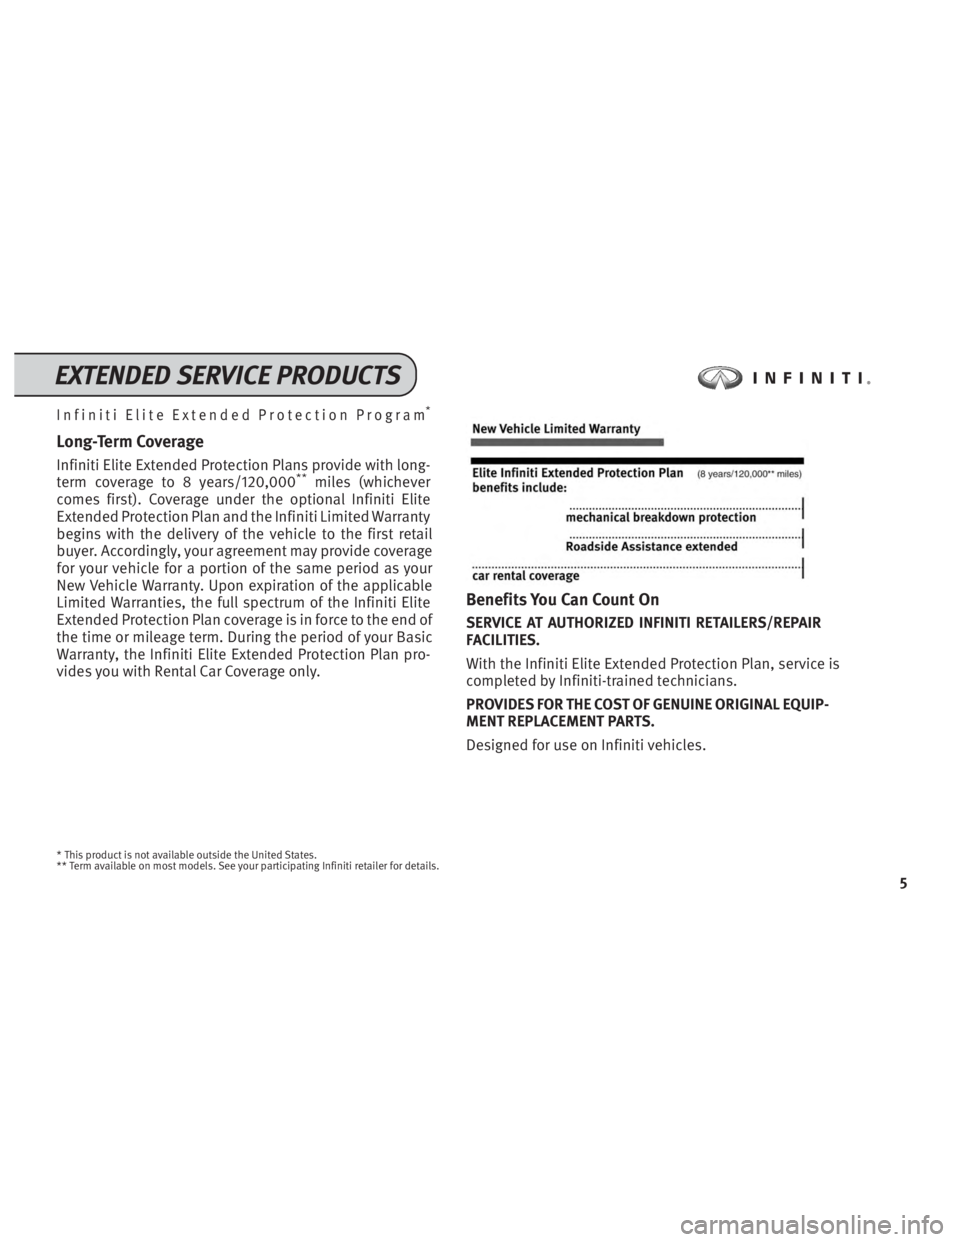 INFINITI QX50 2016  Service And Maintenance Guide Infiniti Elite Extended Protection Program*
Long-Term Coverage
Infiniti Elite Extended Protection Plans provide with long-
term coverage to 8 years/120,000**miles (whichever
comes first). Coverage und